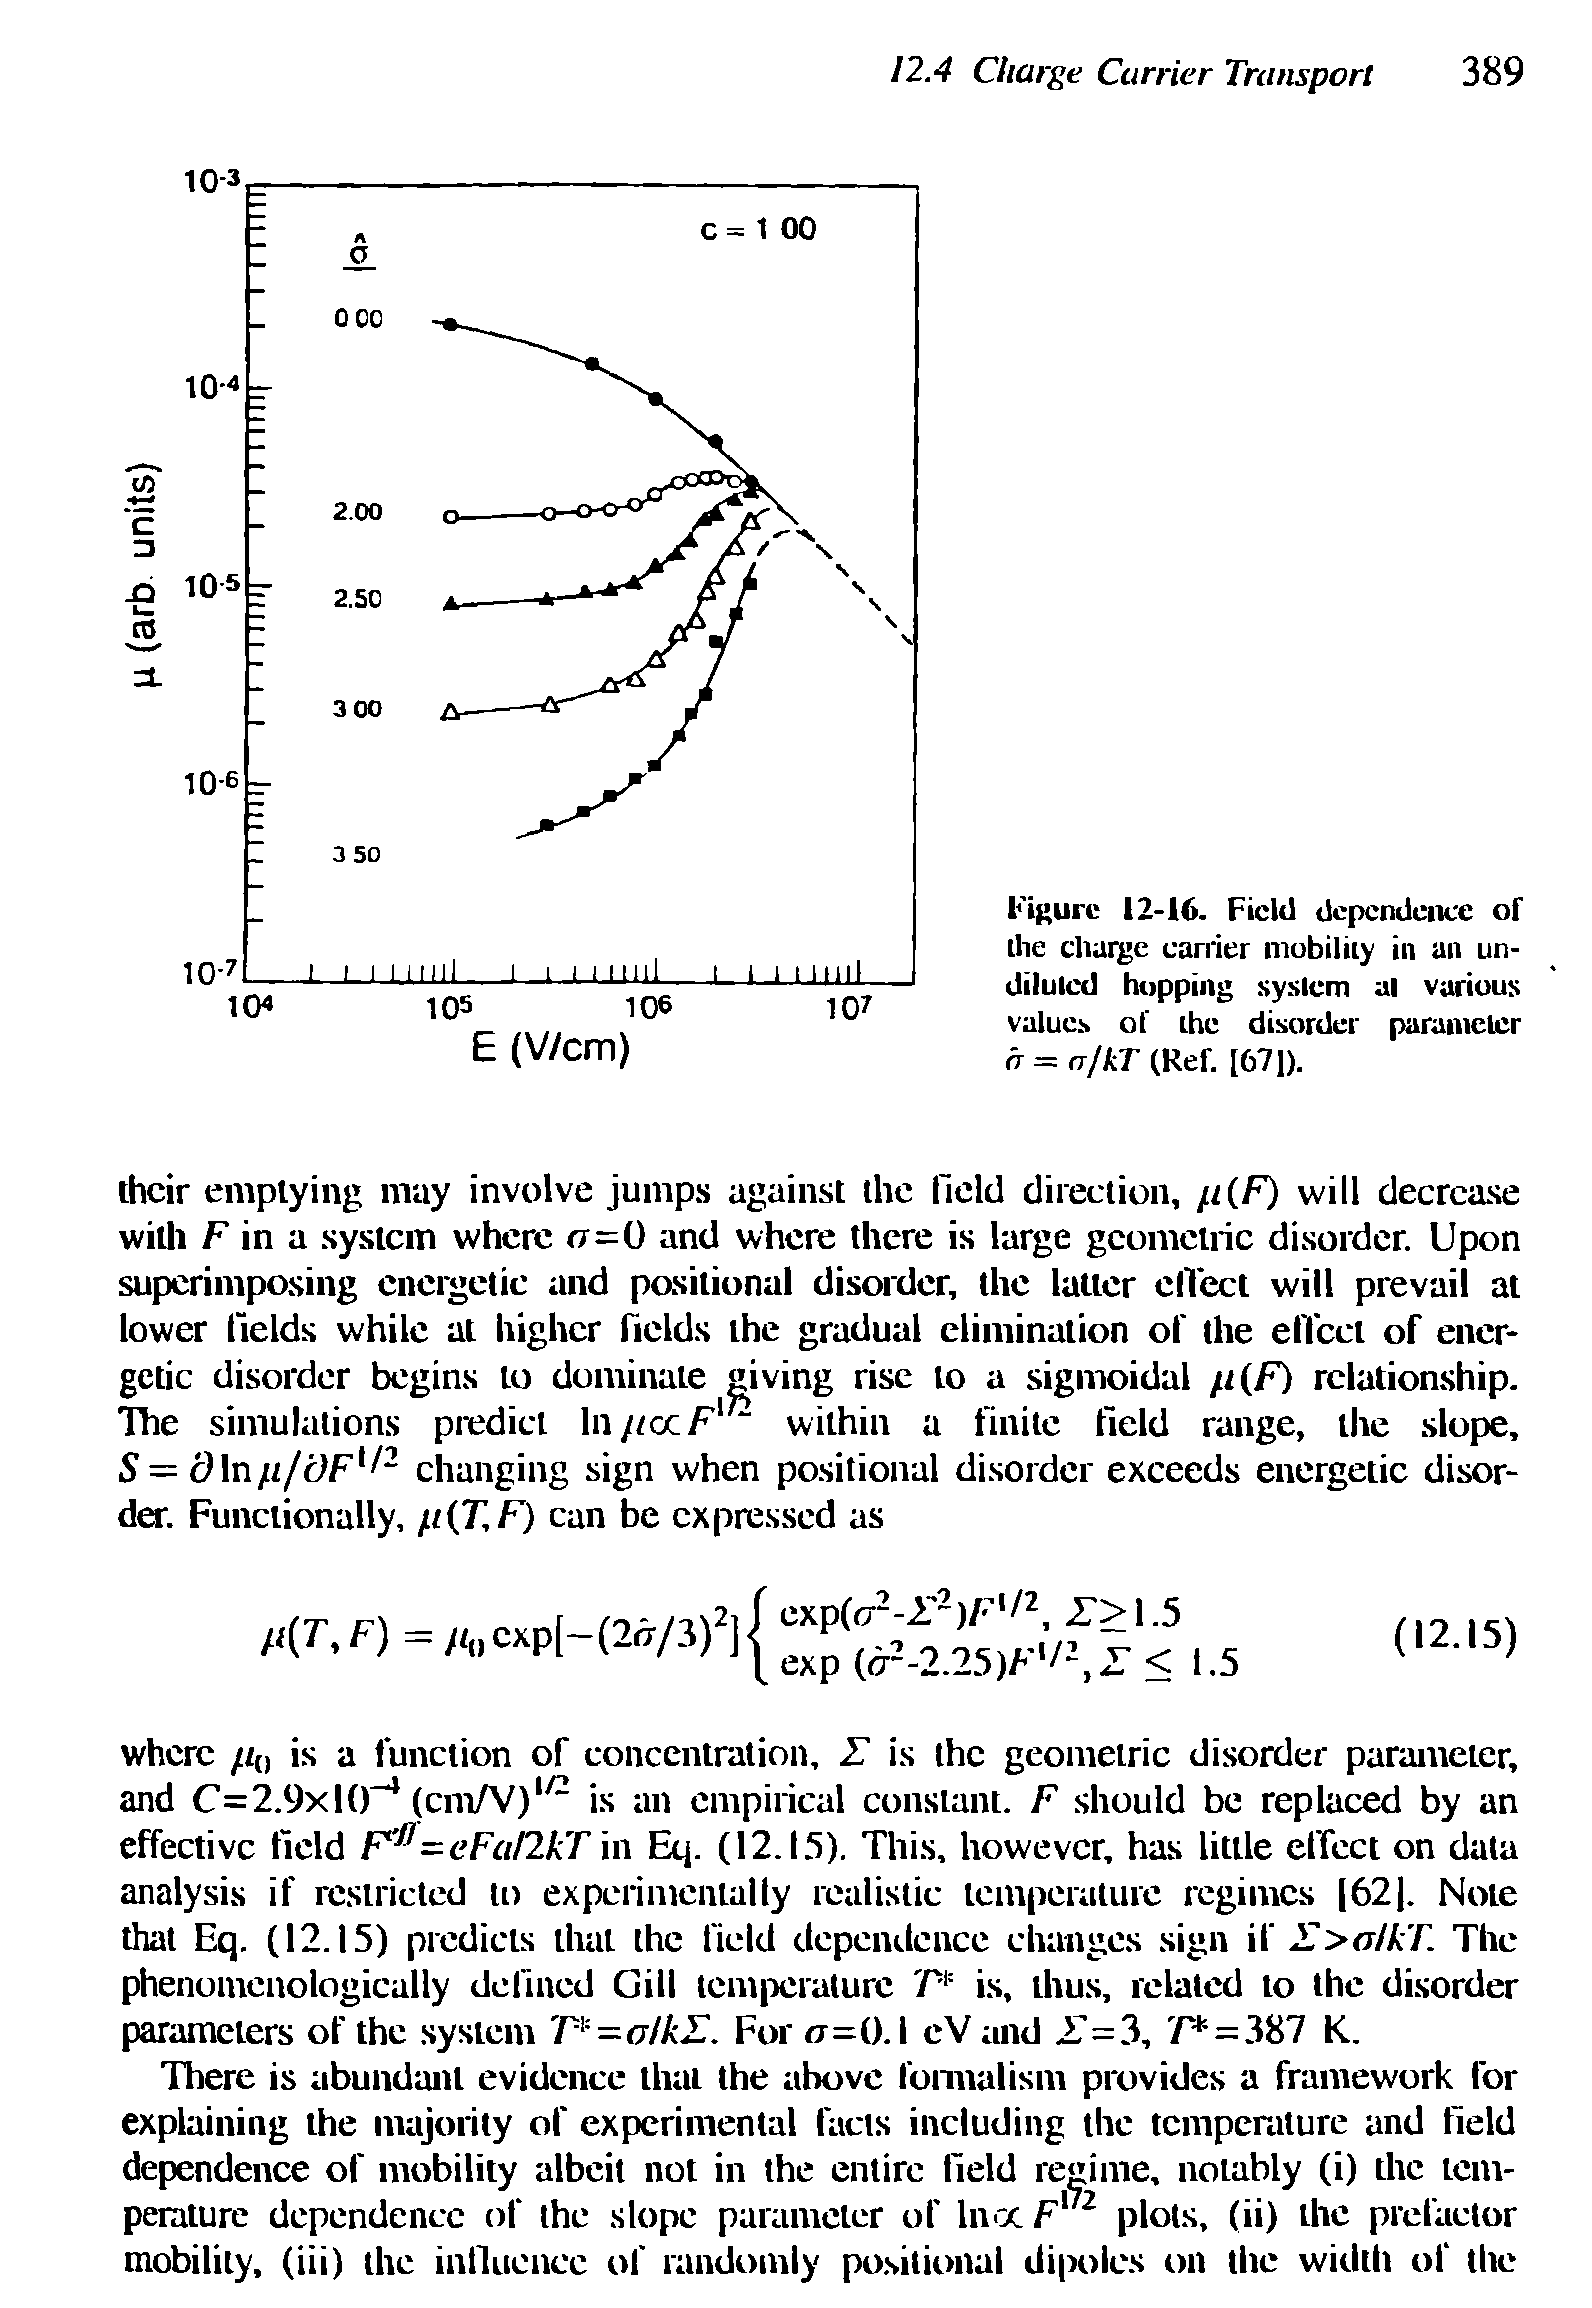 Figure 12-16. Field dependence of die charge carrier mobility in an undiluted hopping system al various values of the disorder parameter a = a/kT (Kef. [67]).